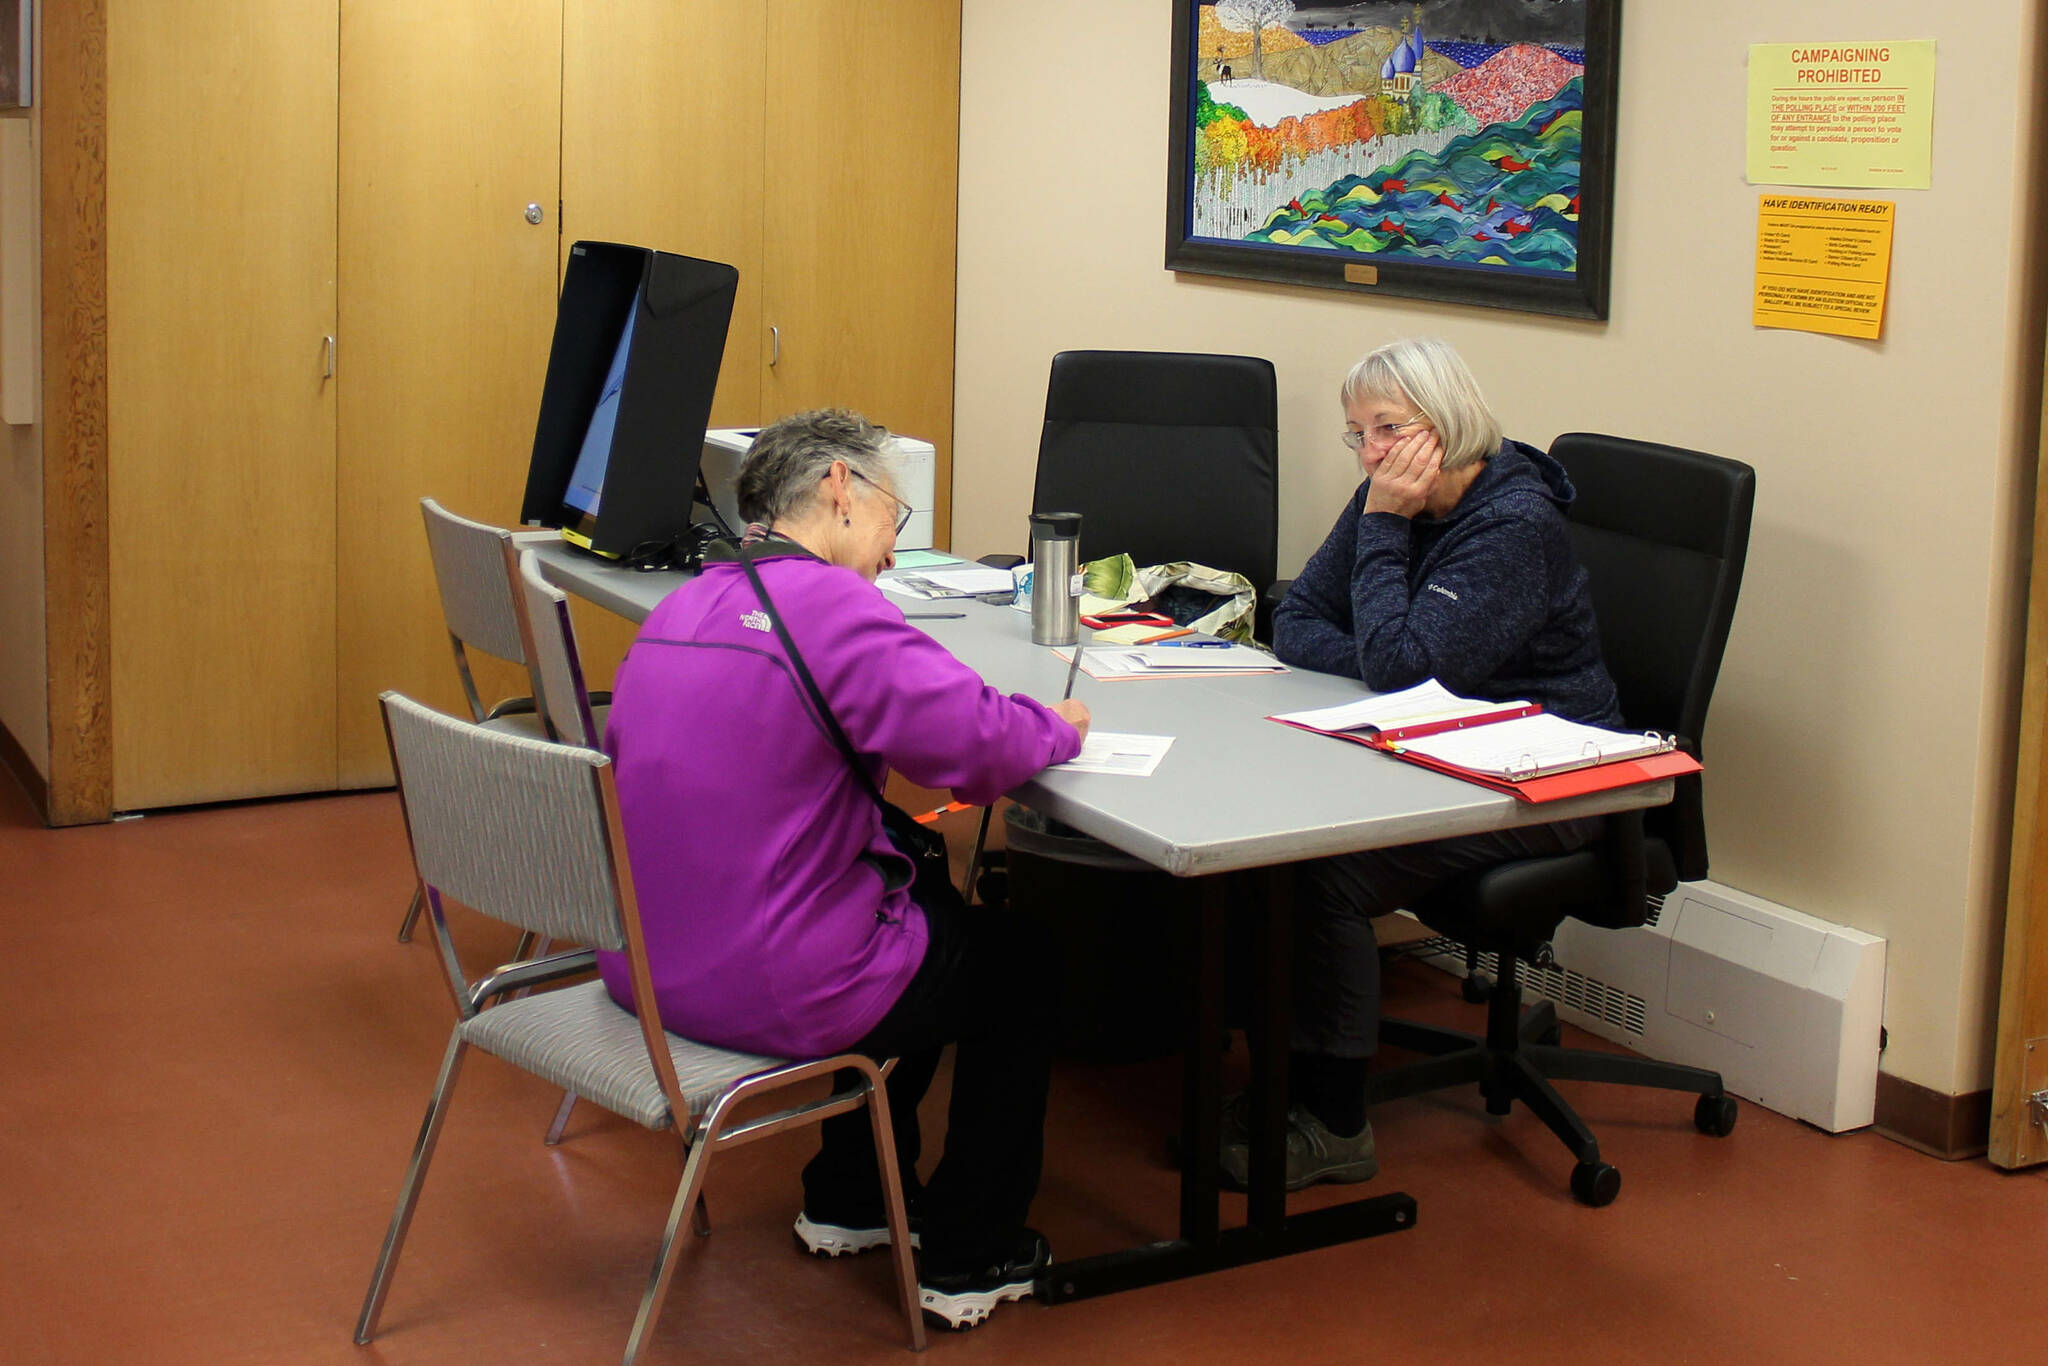 Carol Freas (right) helps a voter fill out absentee election materials in Kenai City Hall ahead of the Oct. 4 municipal election on Thursday, Sept. 29, 2022 in Kenai, Alaska. (Ashlyn O’Hara/Peninsula Clarion)